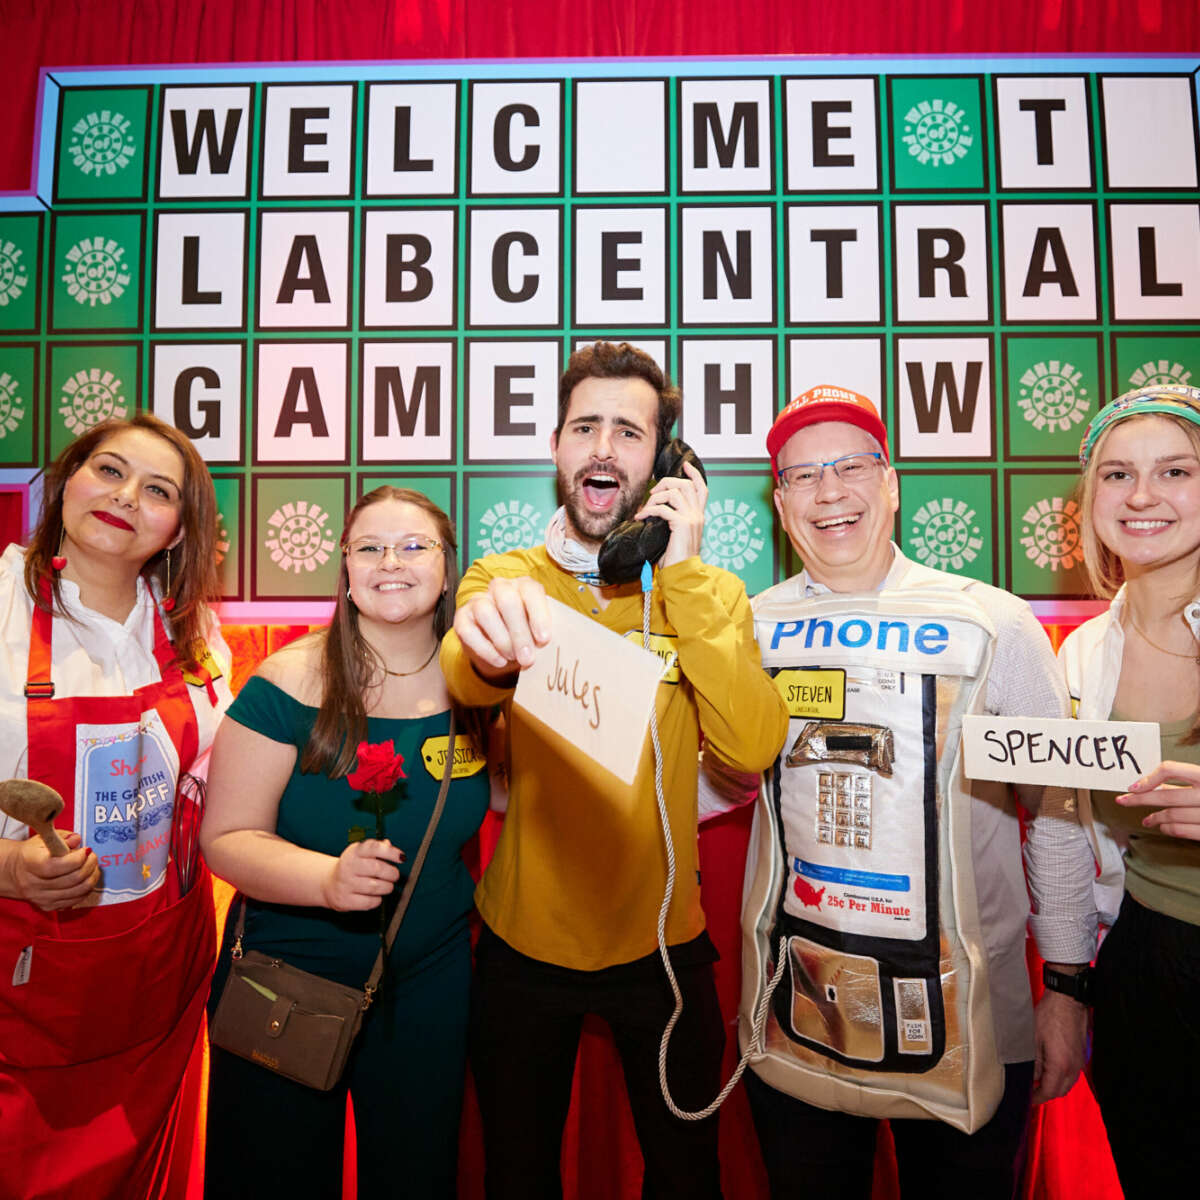 23 0102 Lab Central Gameshow CR6 7586